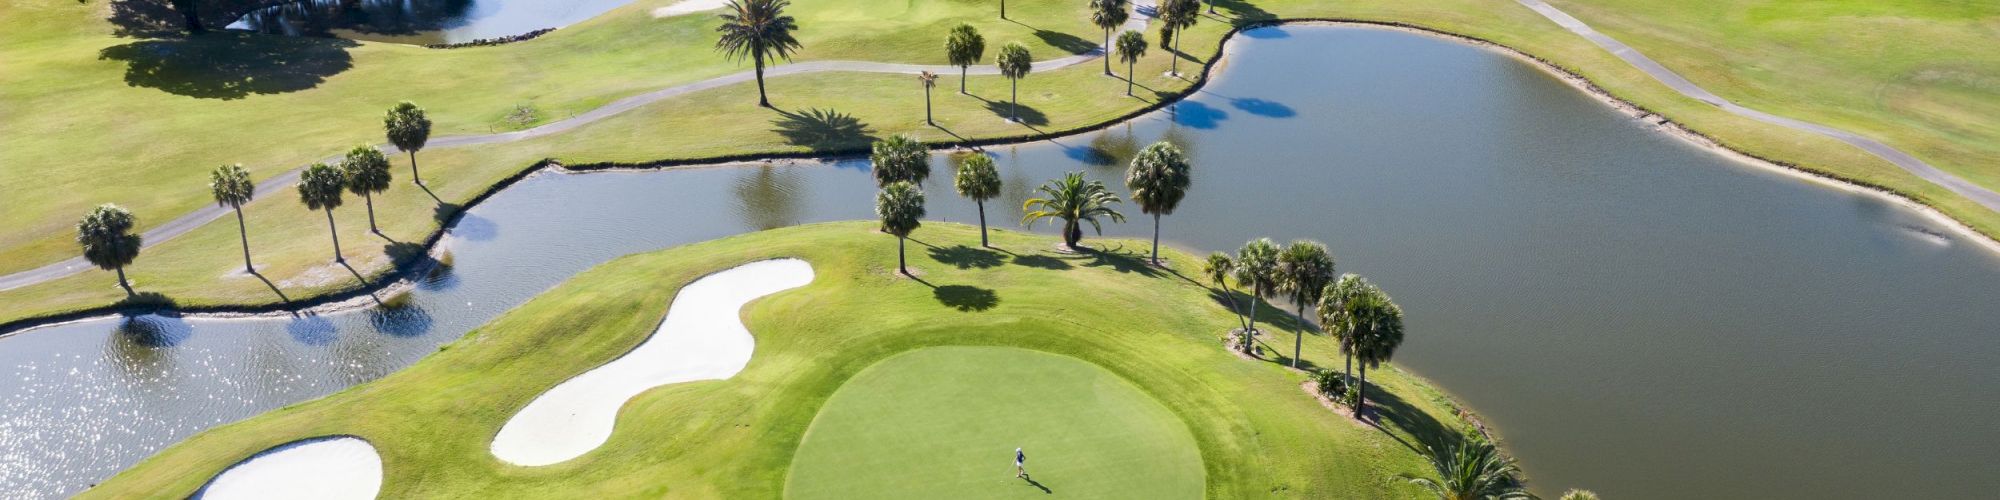 An aerial view of a golf course featuring a green, sand traps, water hazards, palm trees, and a golfer.